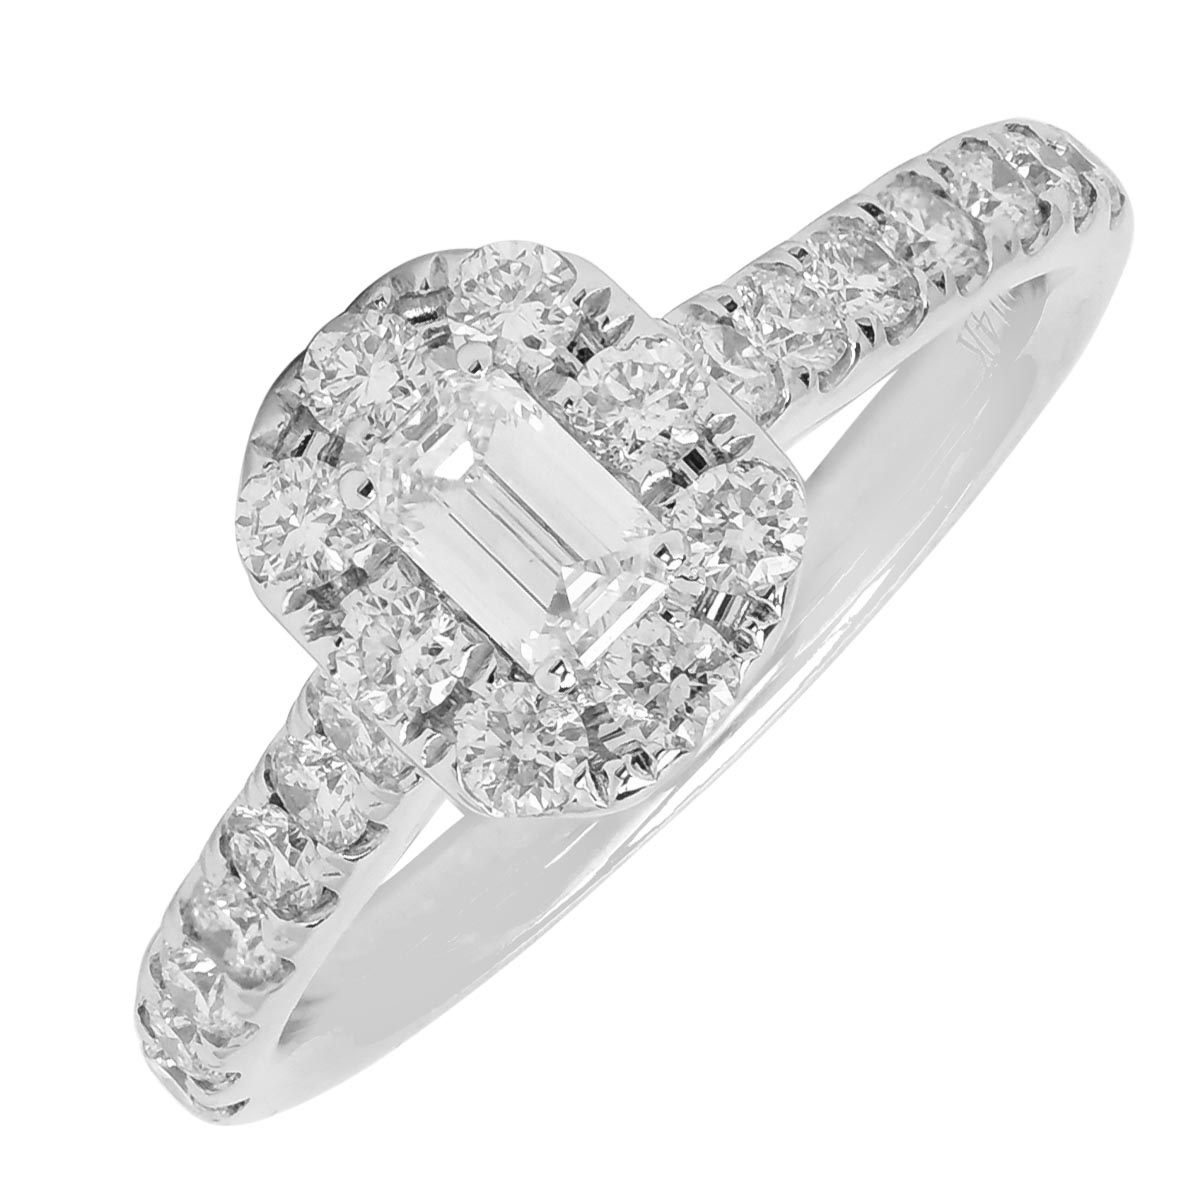 Daydream Emerald Cut Diamond Halo Engagement Ring in 14kt White Gold (7/8ct tw)